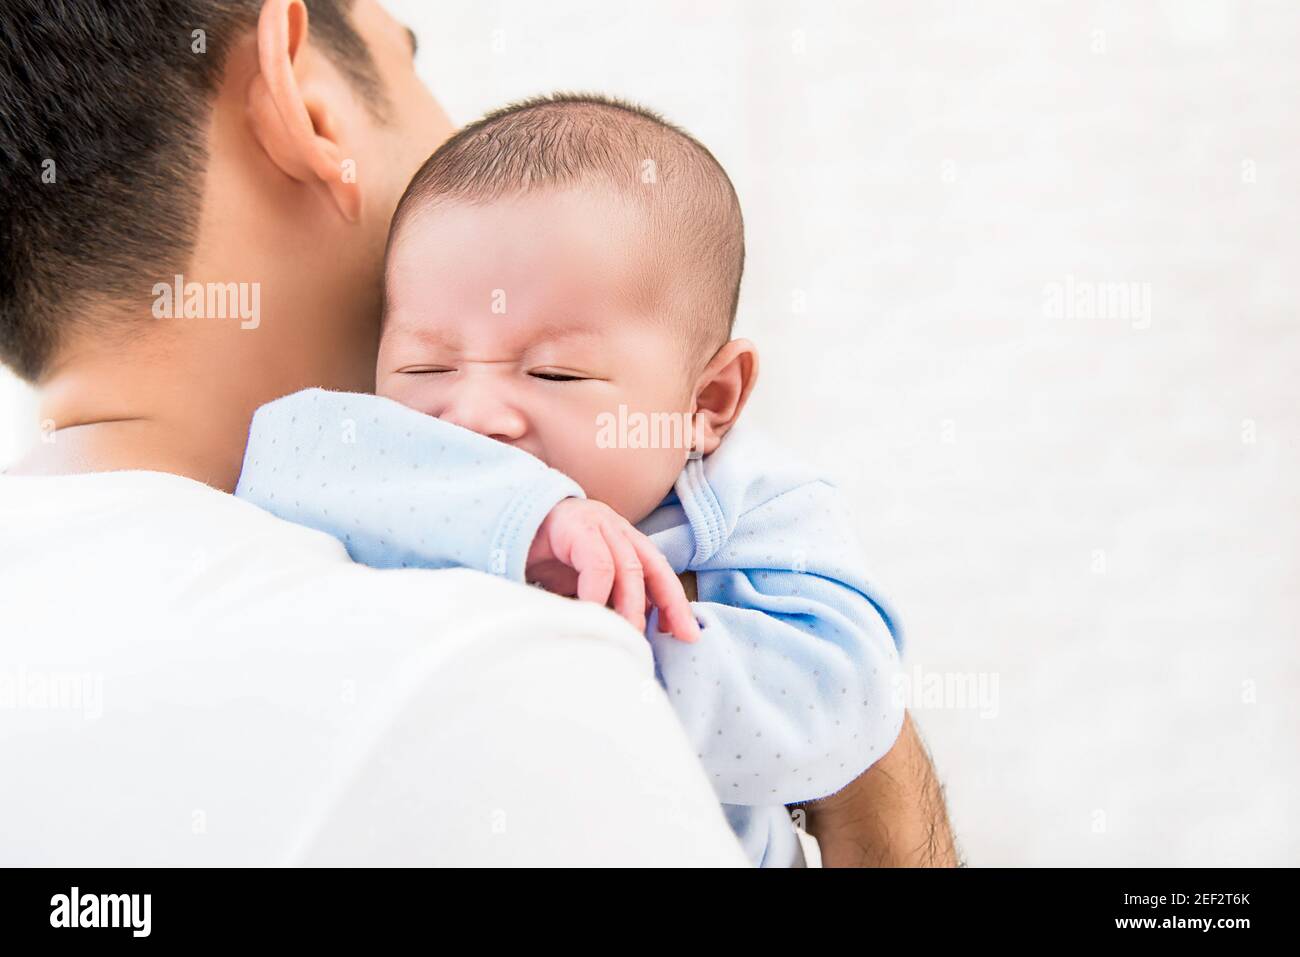 New father holding his adorable little baby Stock Photo